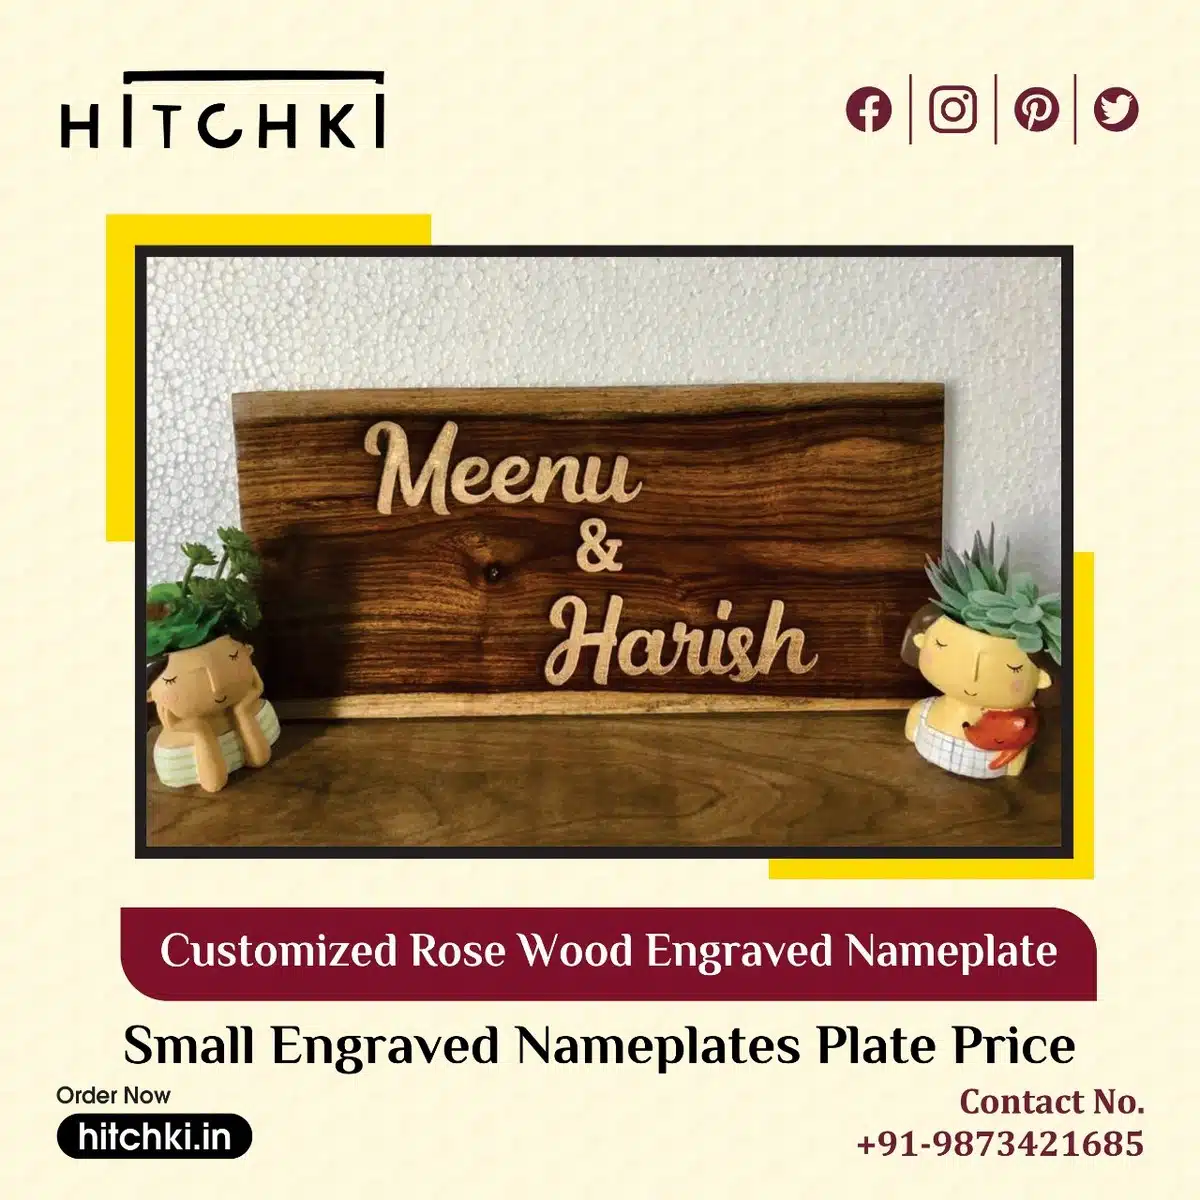 Buy Latest Small Engraved Name Plate For Your Home